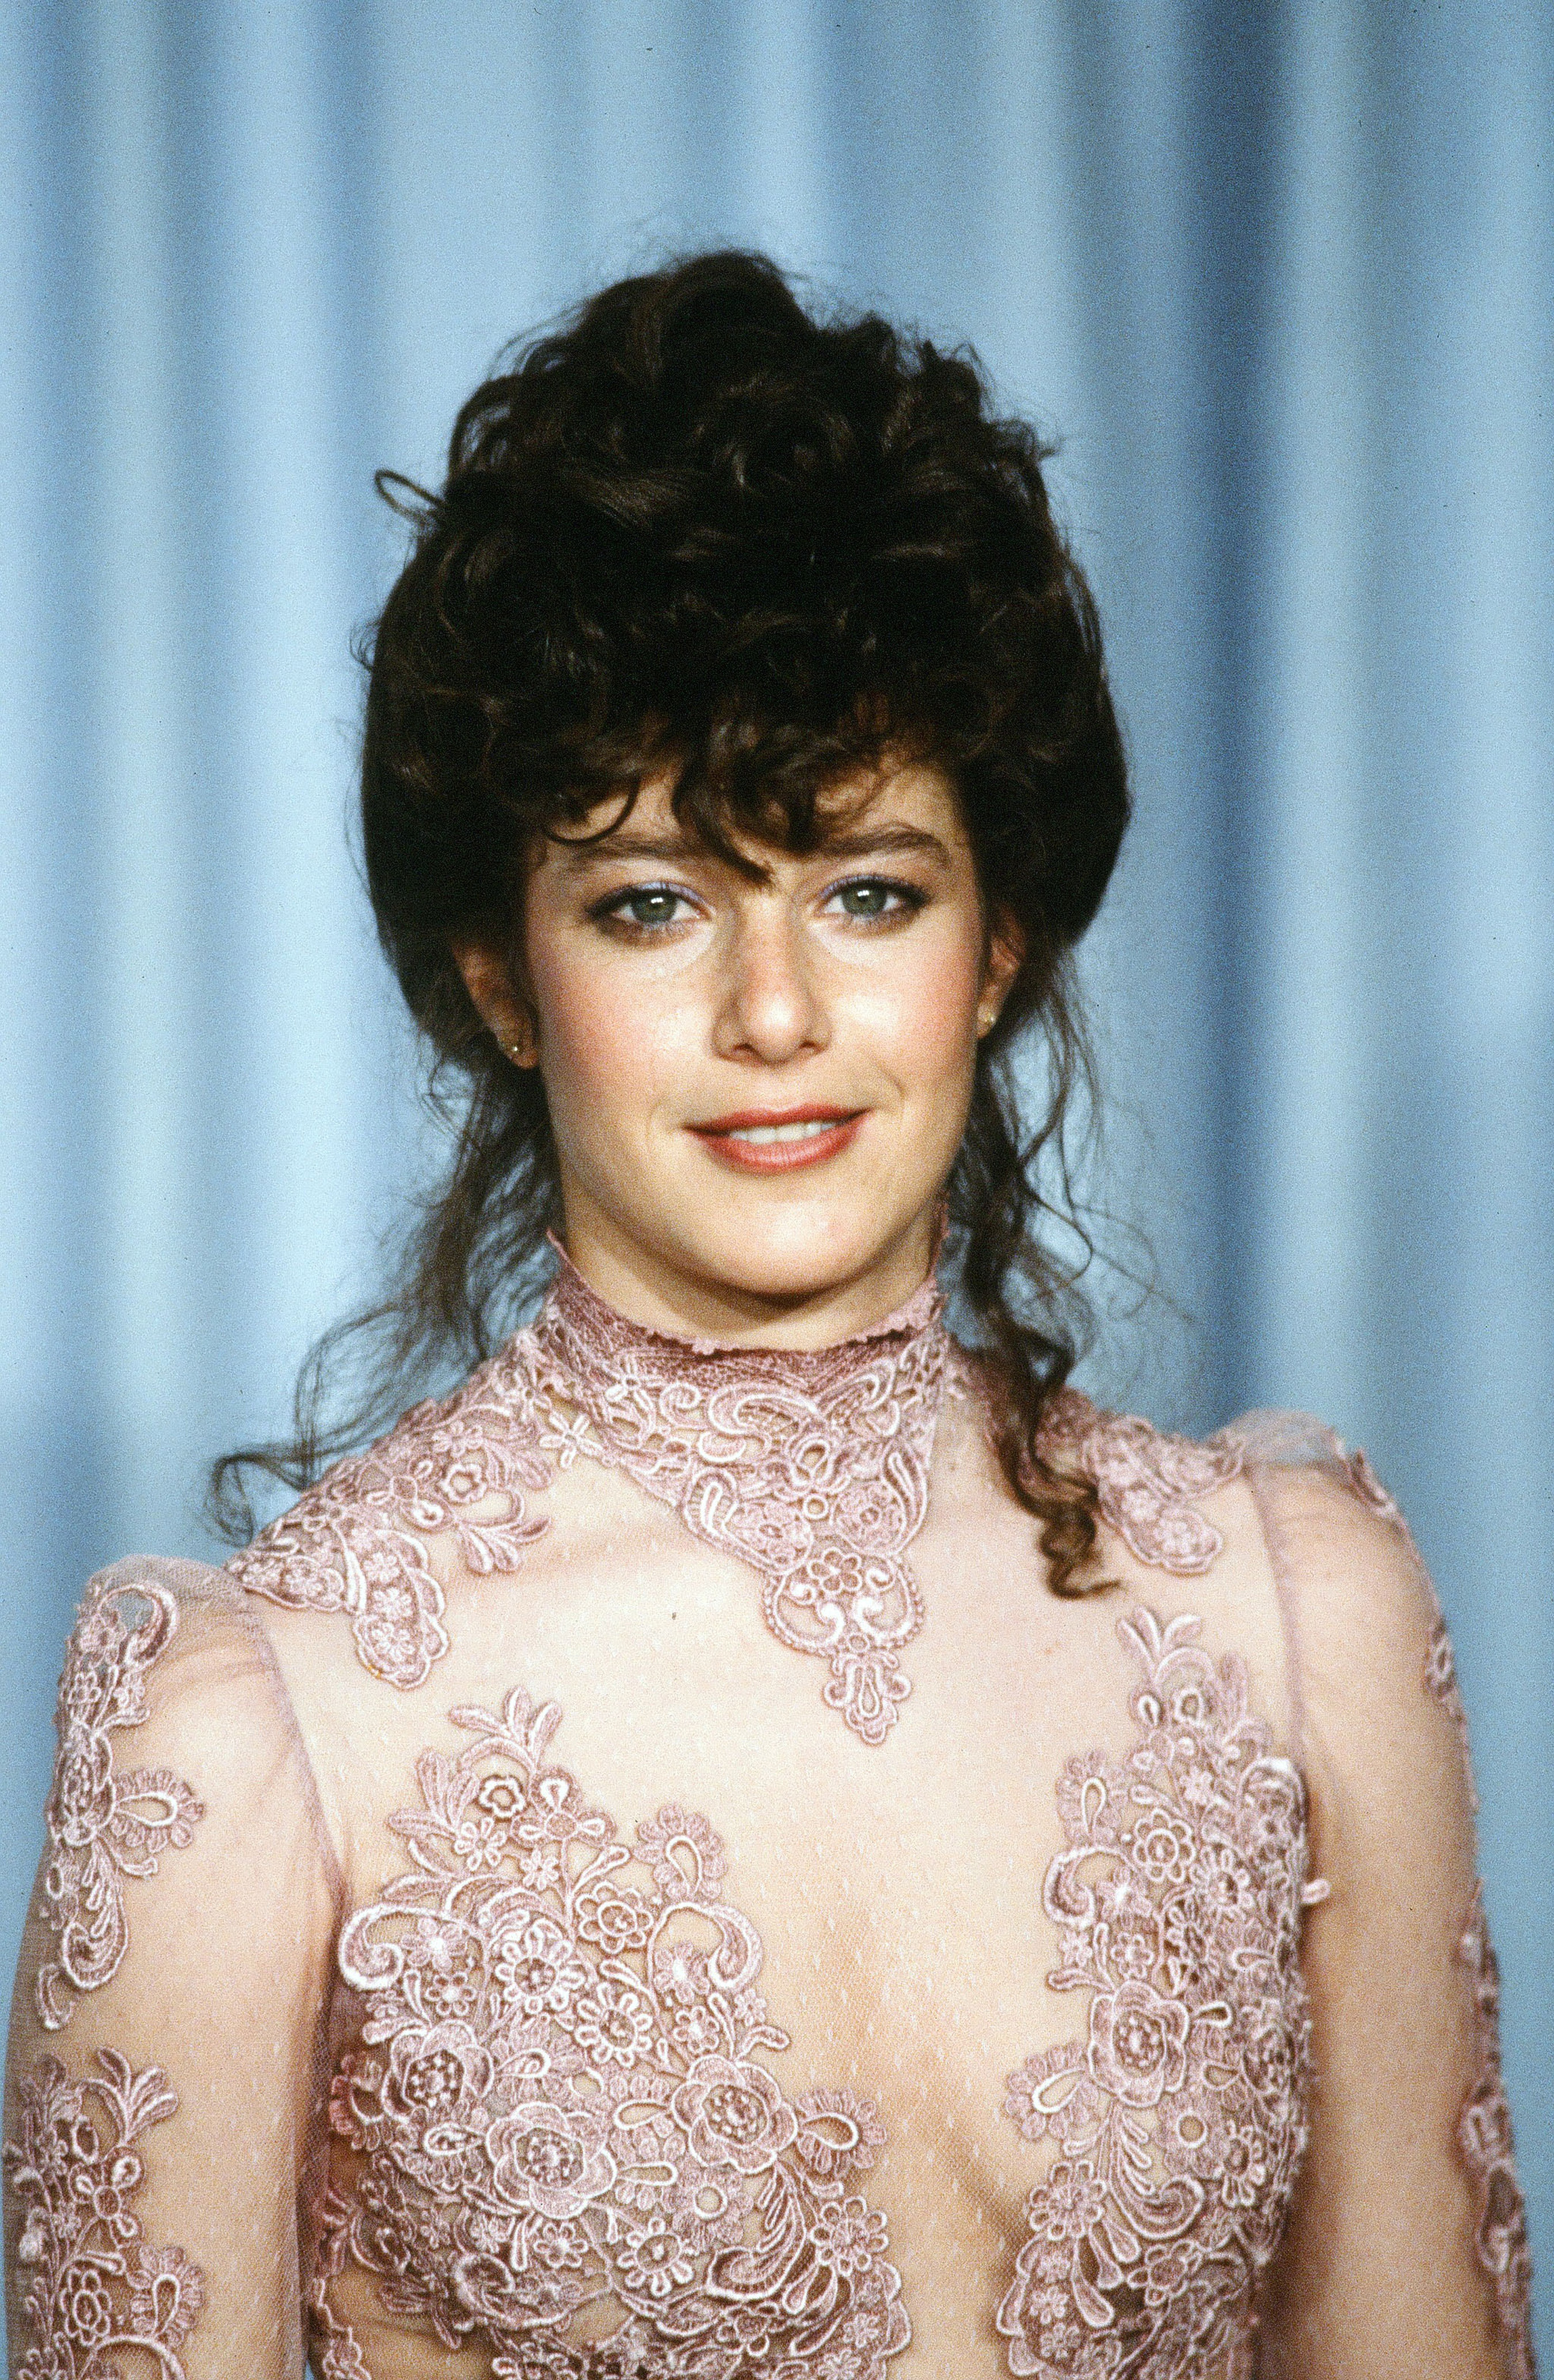 Debra Winger during the 54th Academy Awards on March 29, 1982 in Los Angeles, California. | Source: Getty Images